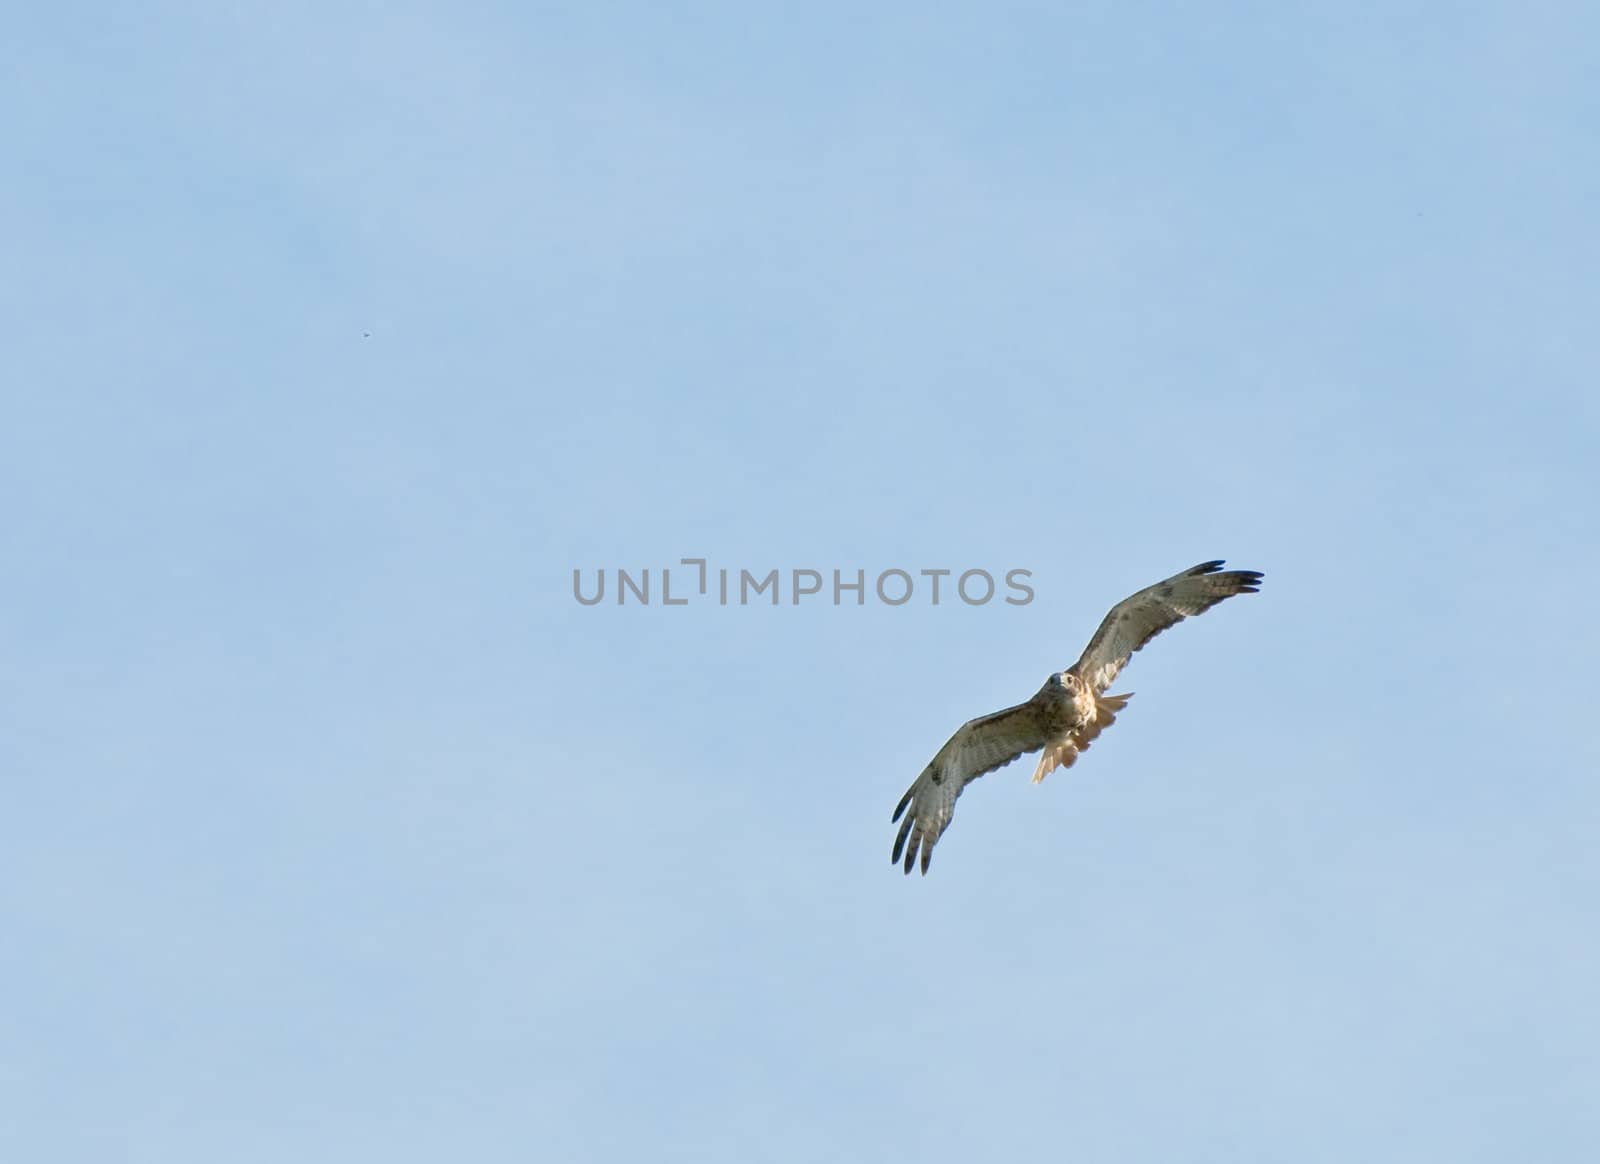 An adult hawk shot with lots of blue sky copyspace